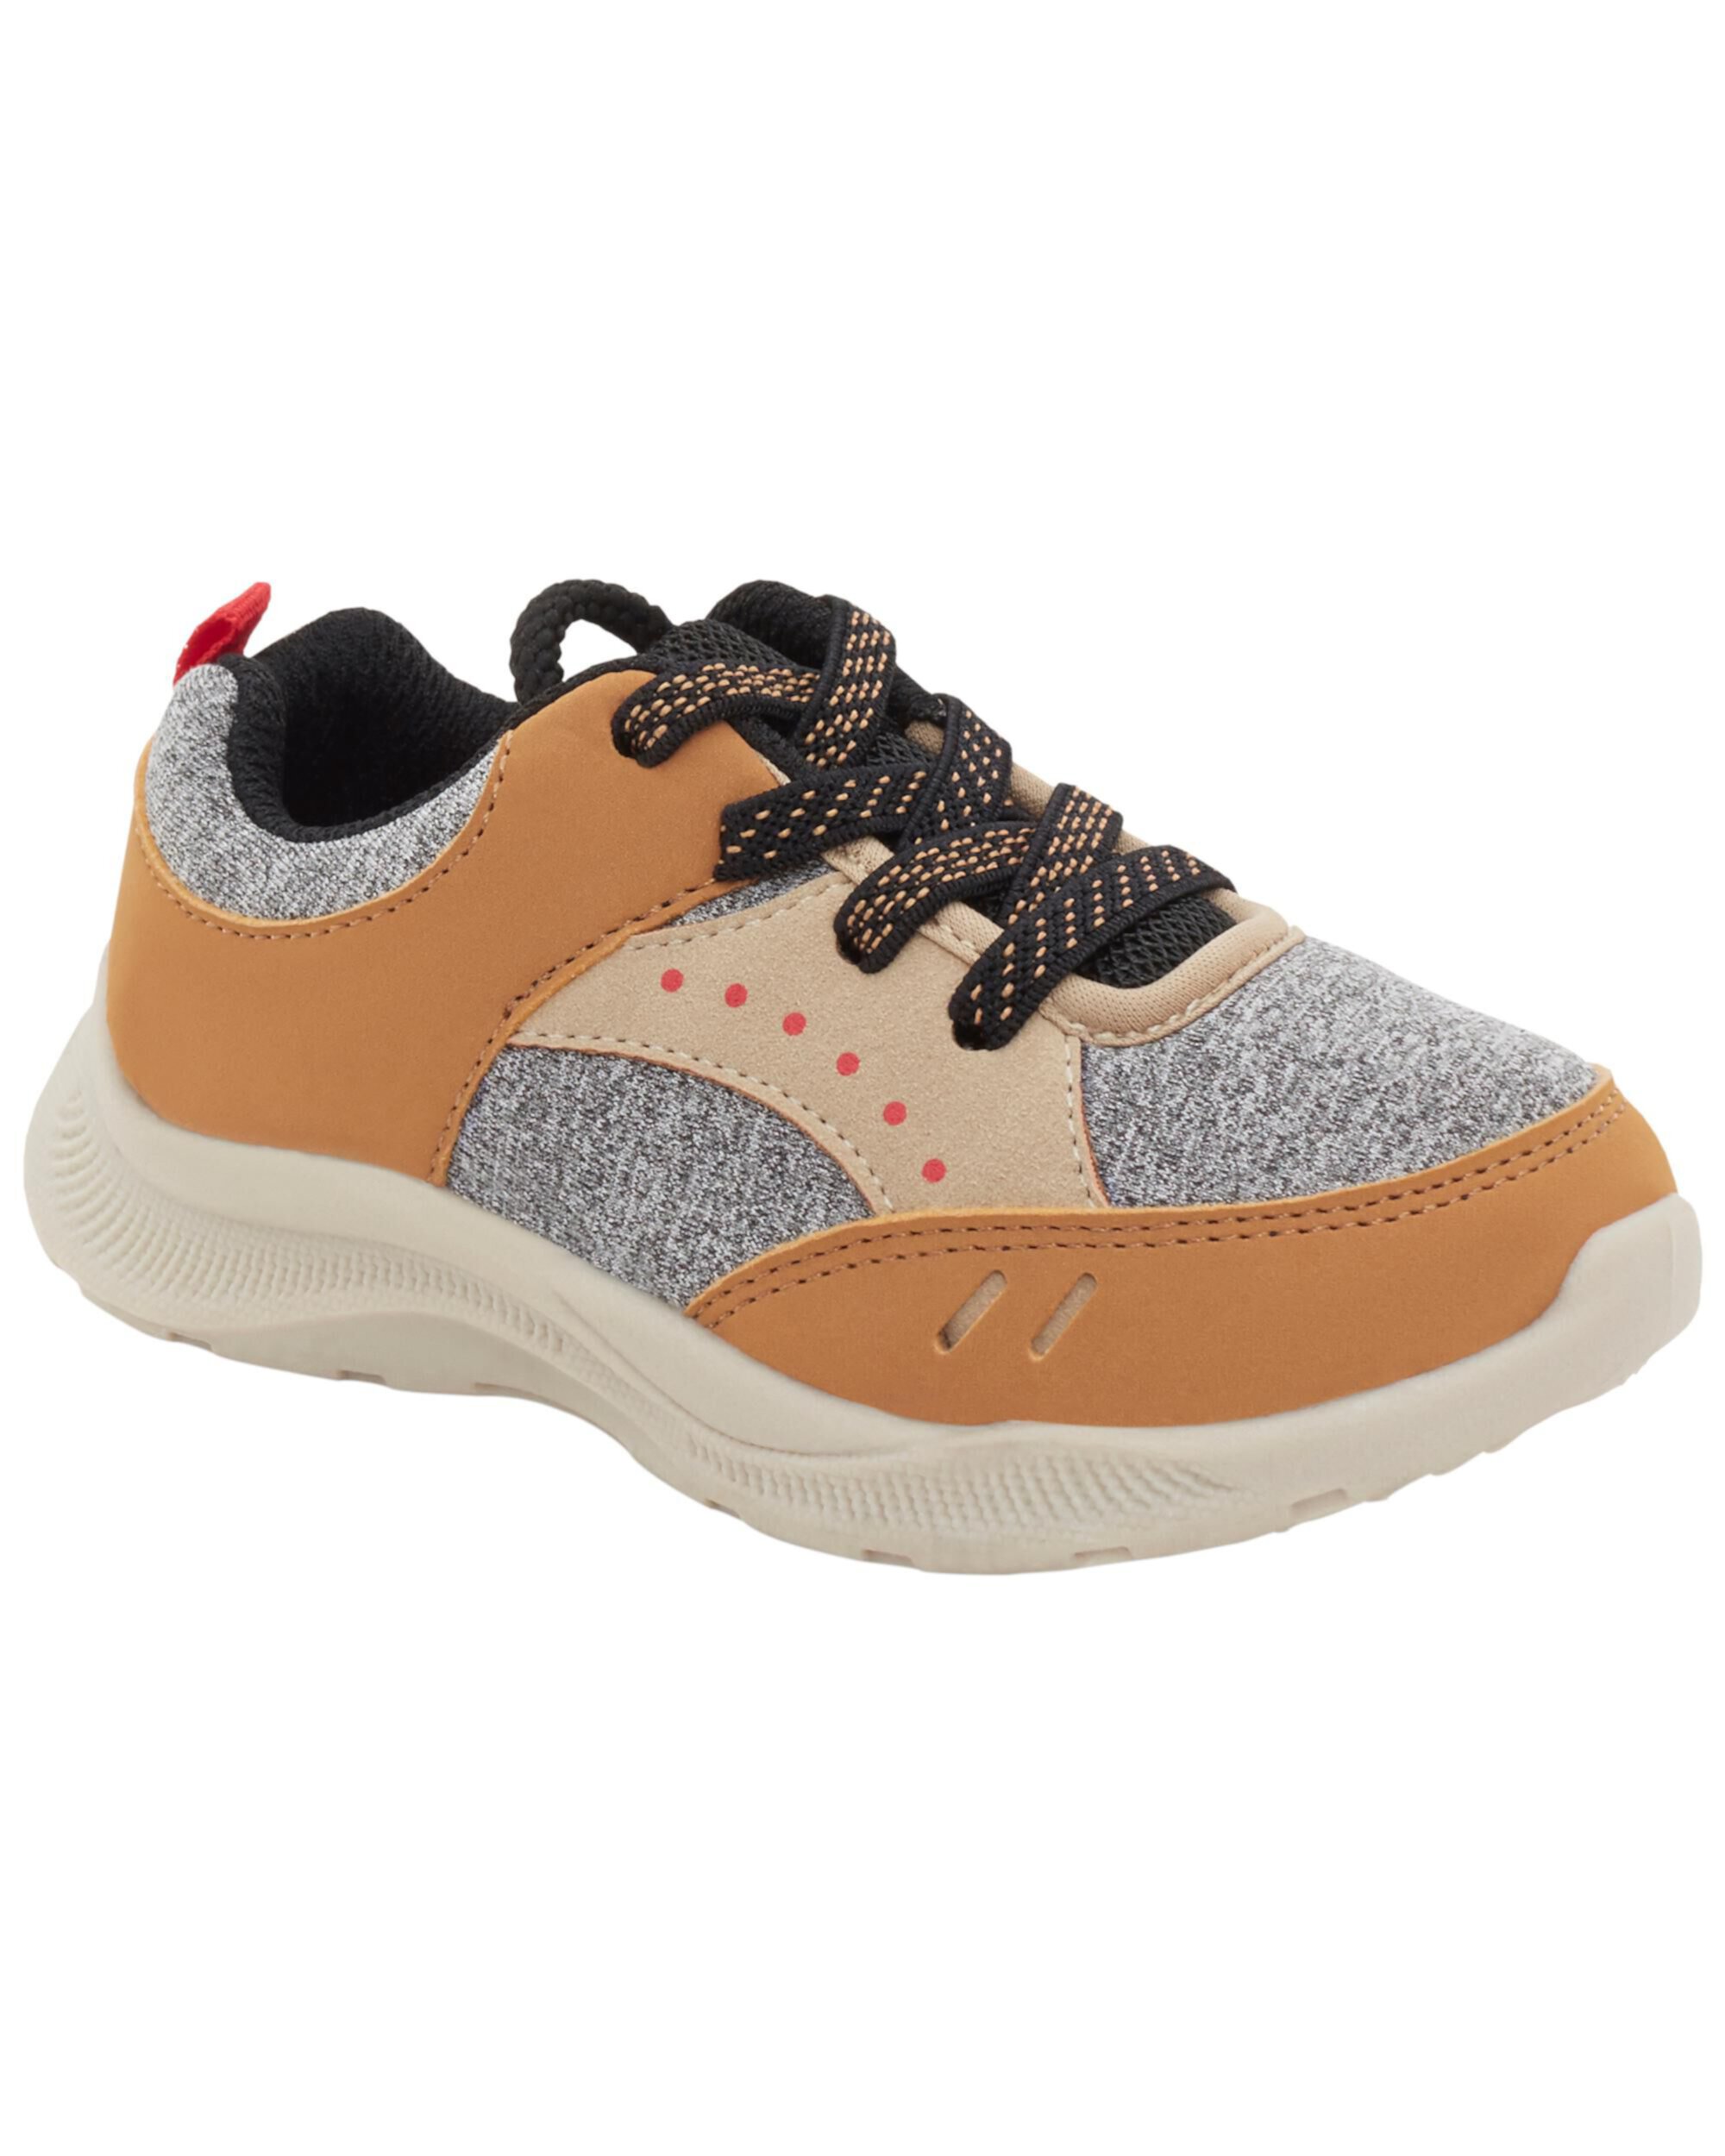 Toddler Pull-On Color Block Sneakers Carter's